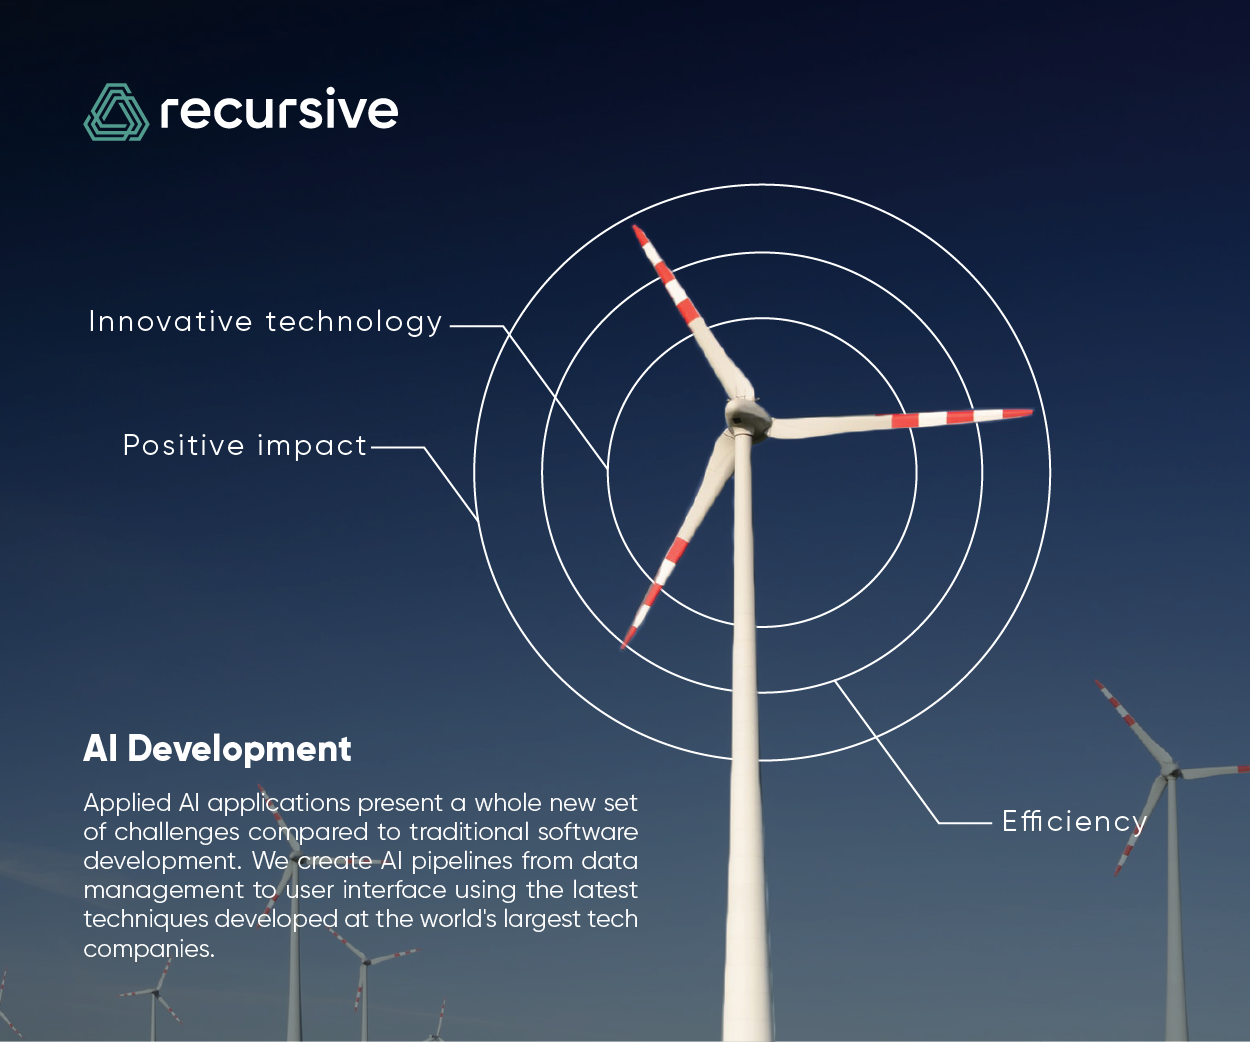 Recursive a consulting company working on developing AI systems with a focus on sustainability Poster Design Image